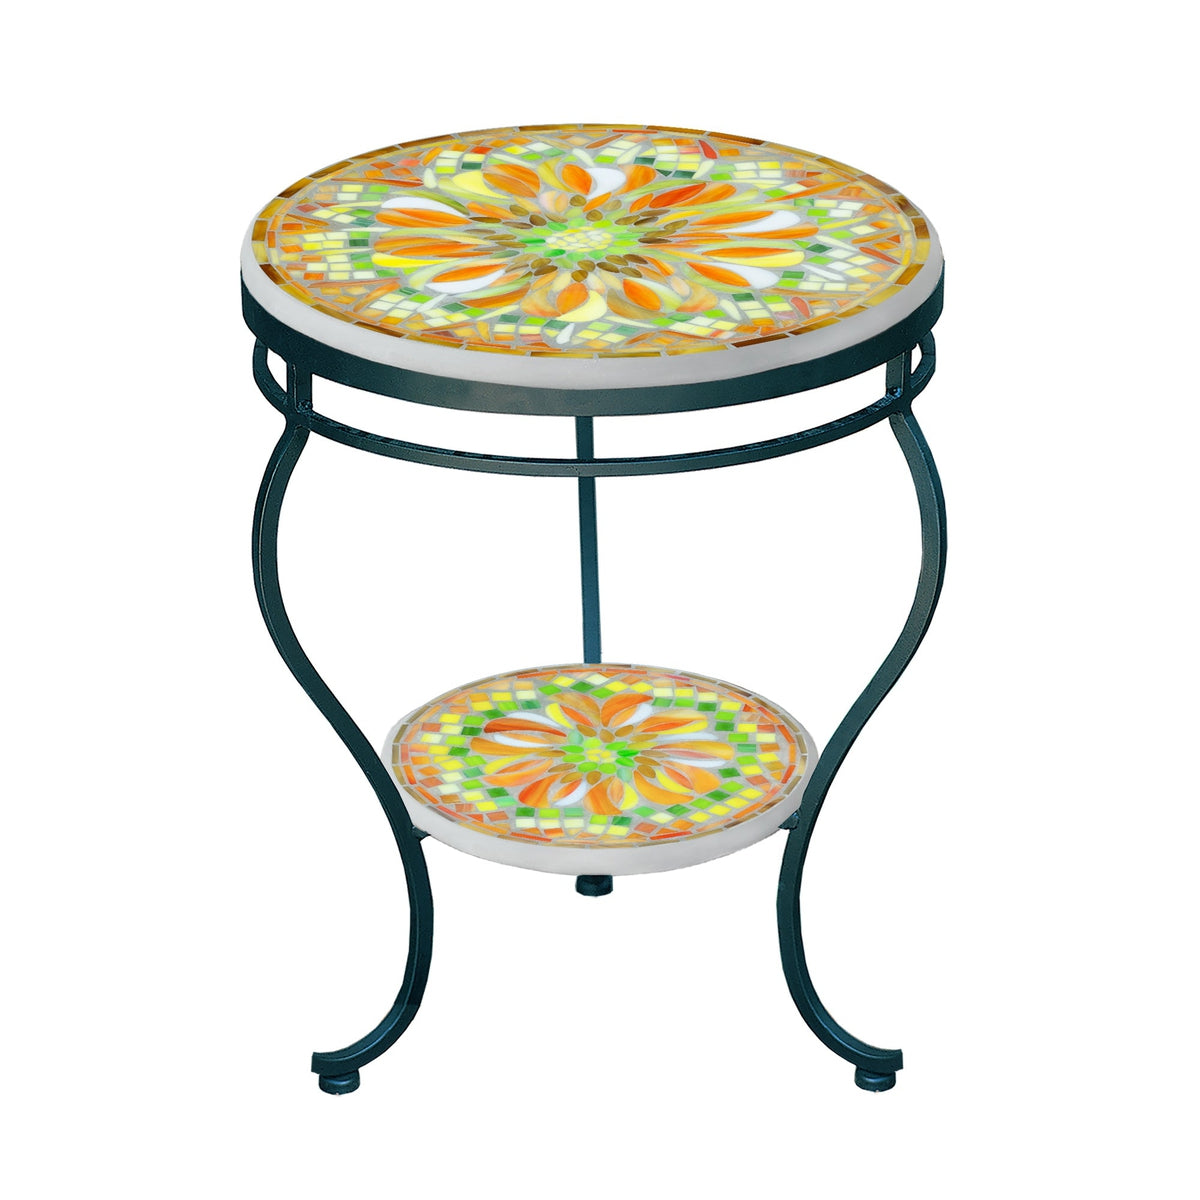 Umbria Mosaic Side Table - Tiered